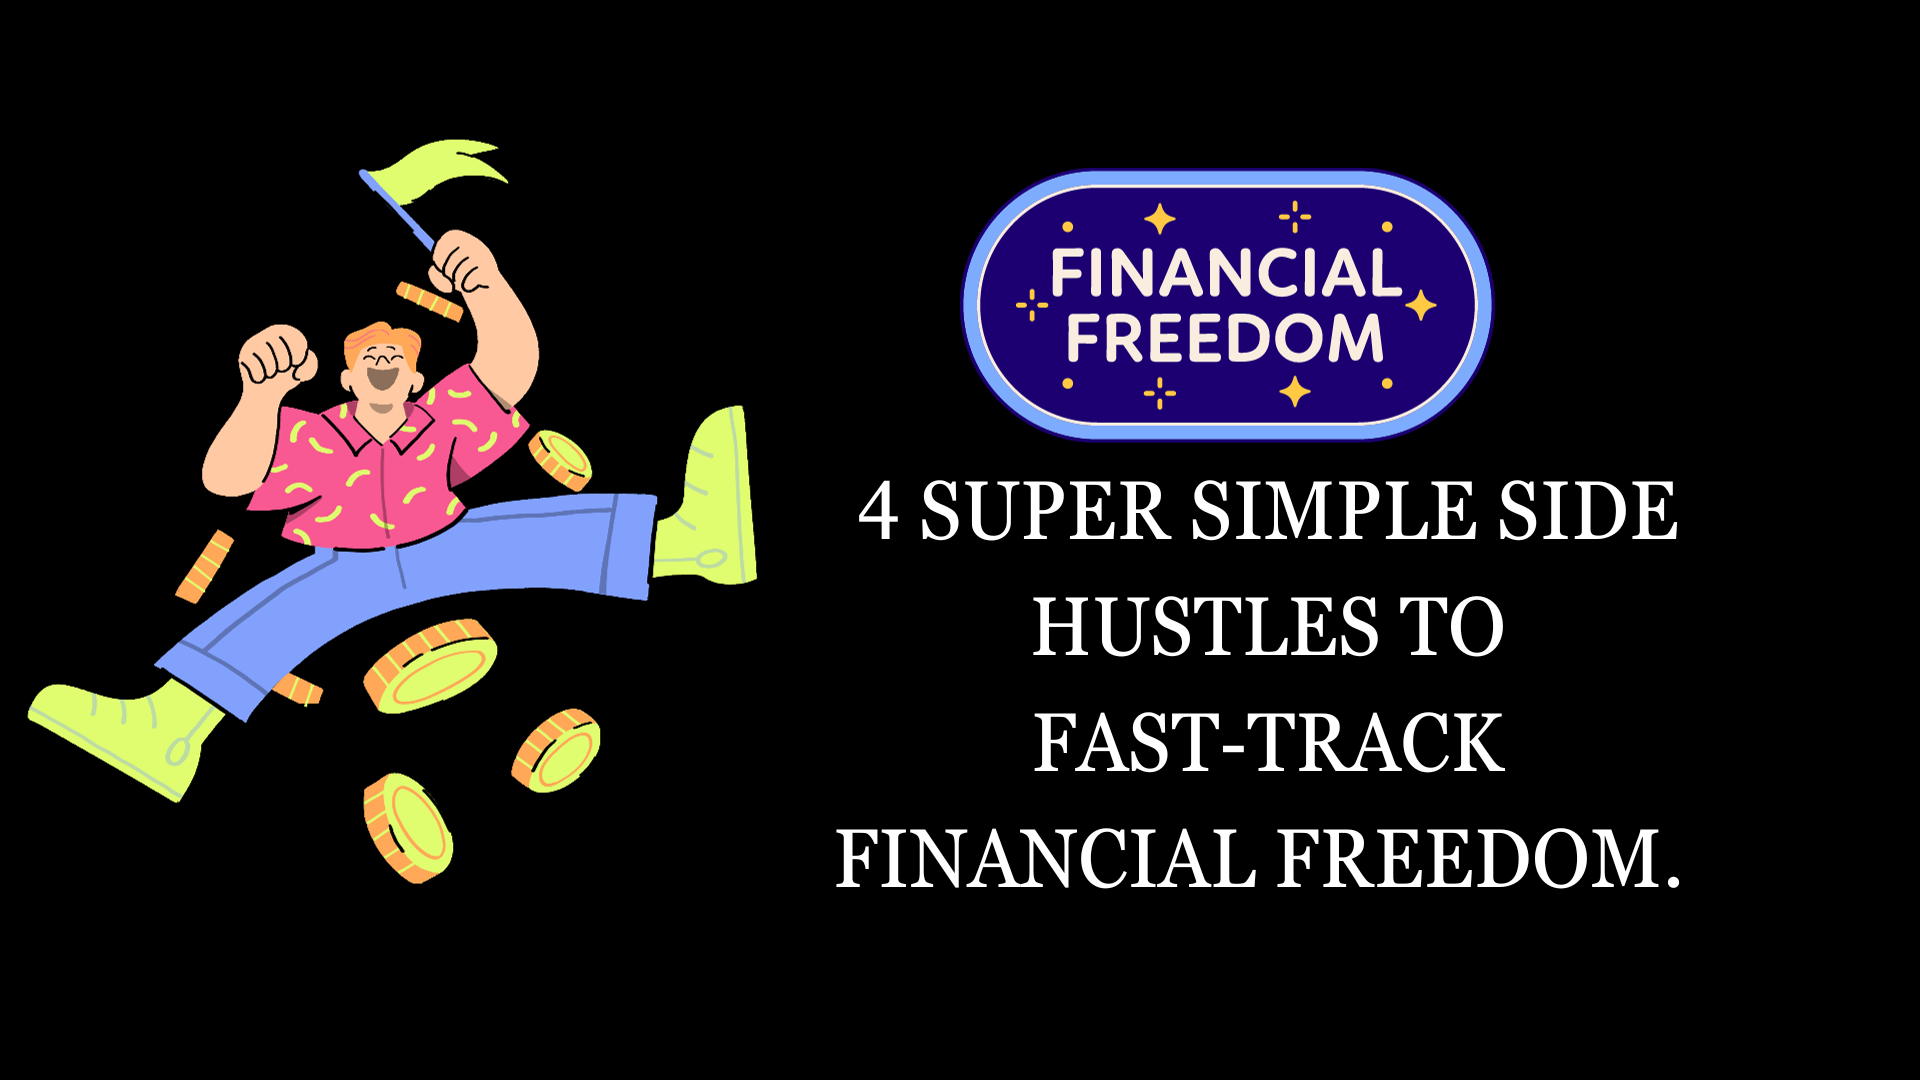 4 super simple side hustles to fast-track financial freedom